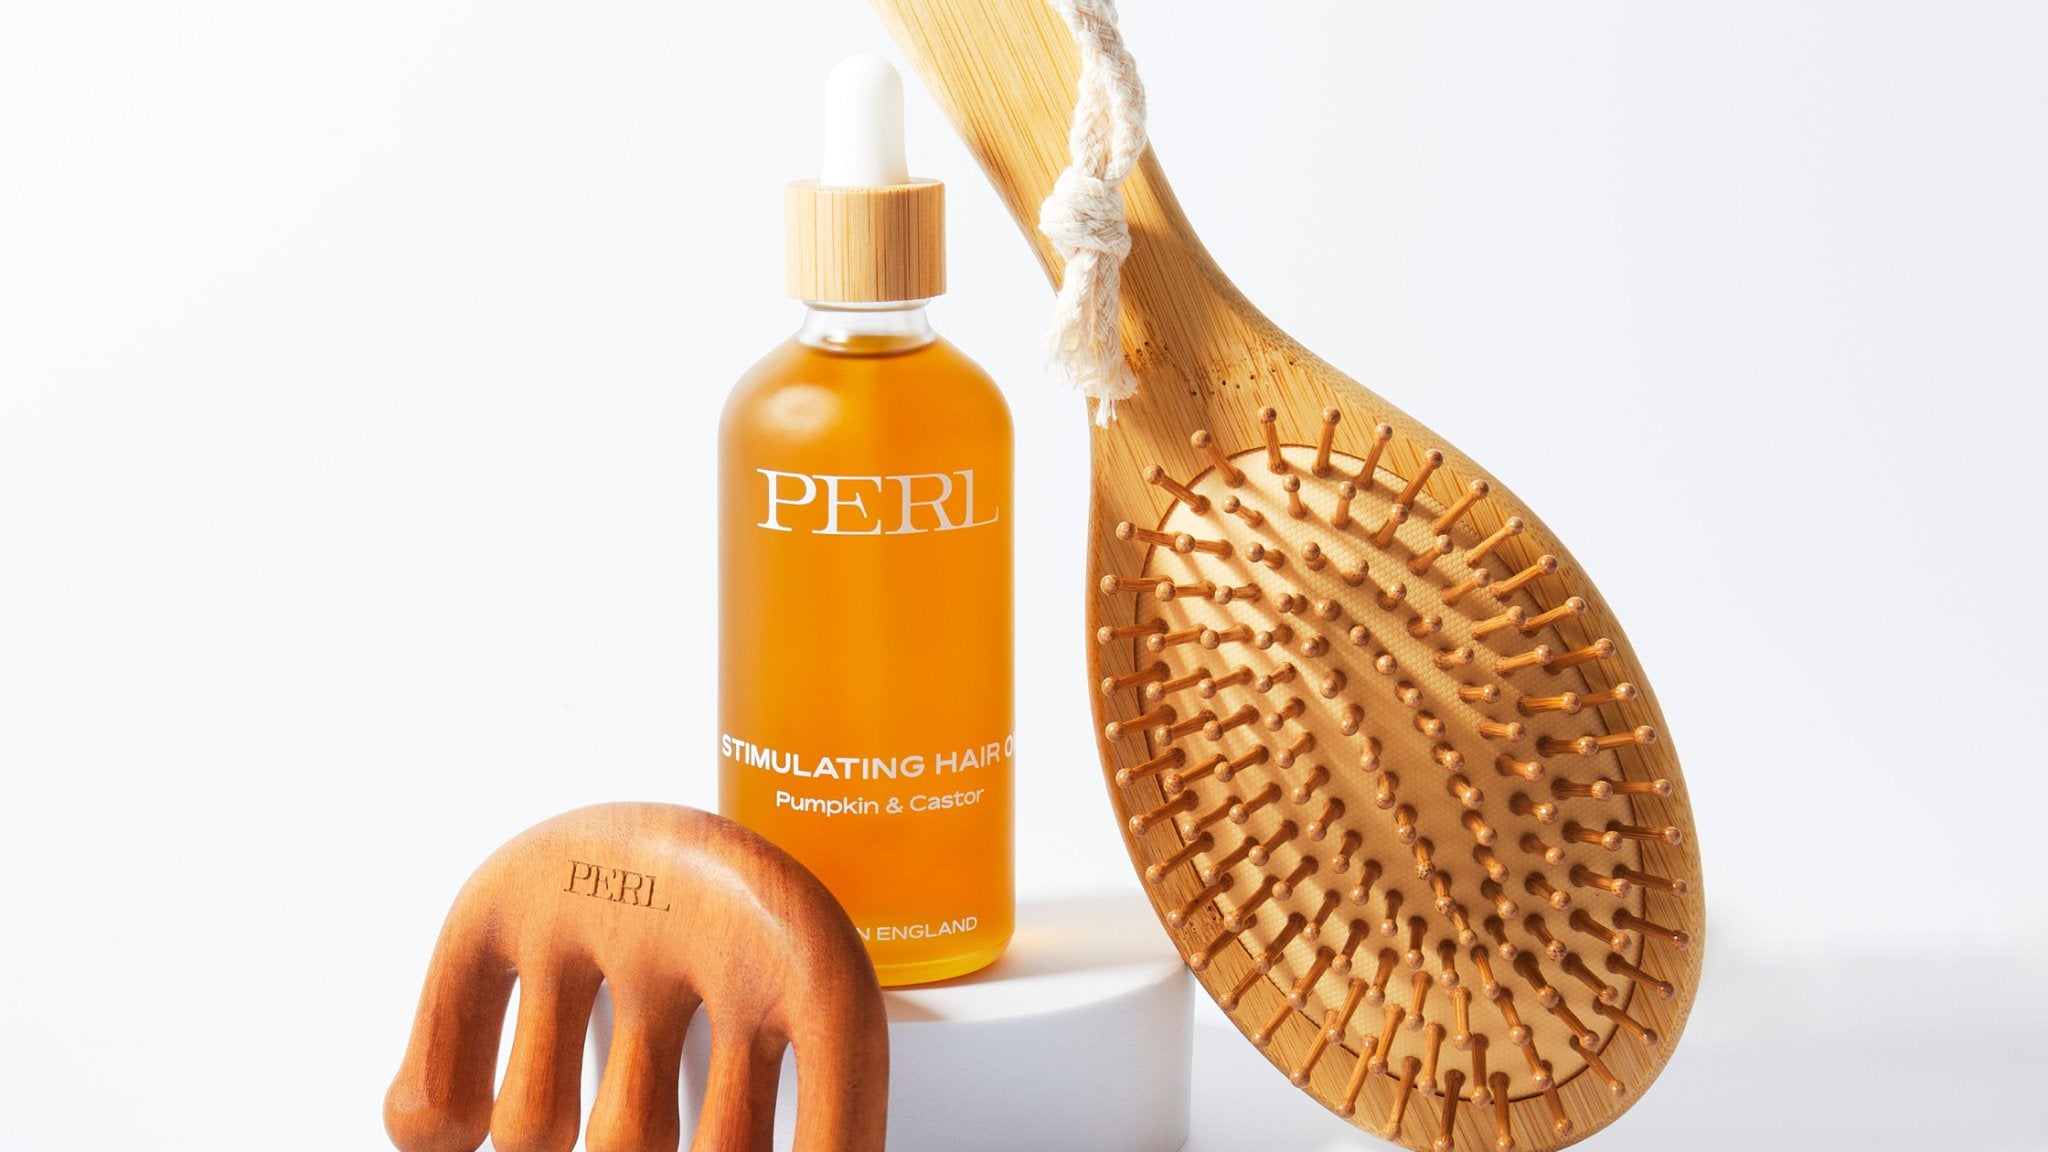 Introducing Perl's Stimulating Hair Oil: A New Chapter in Hair Care This May - PERL Cosmetics